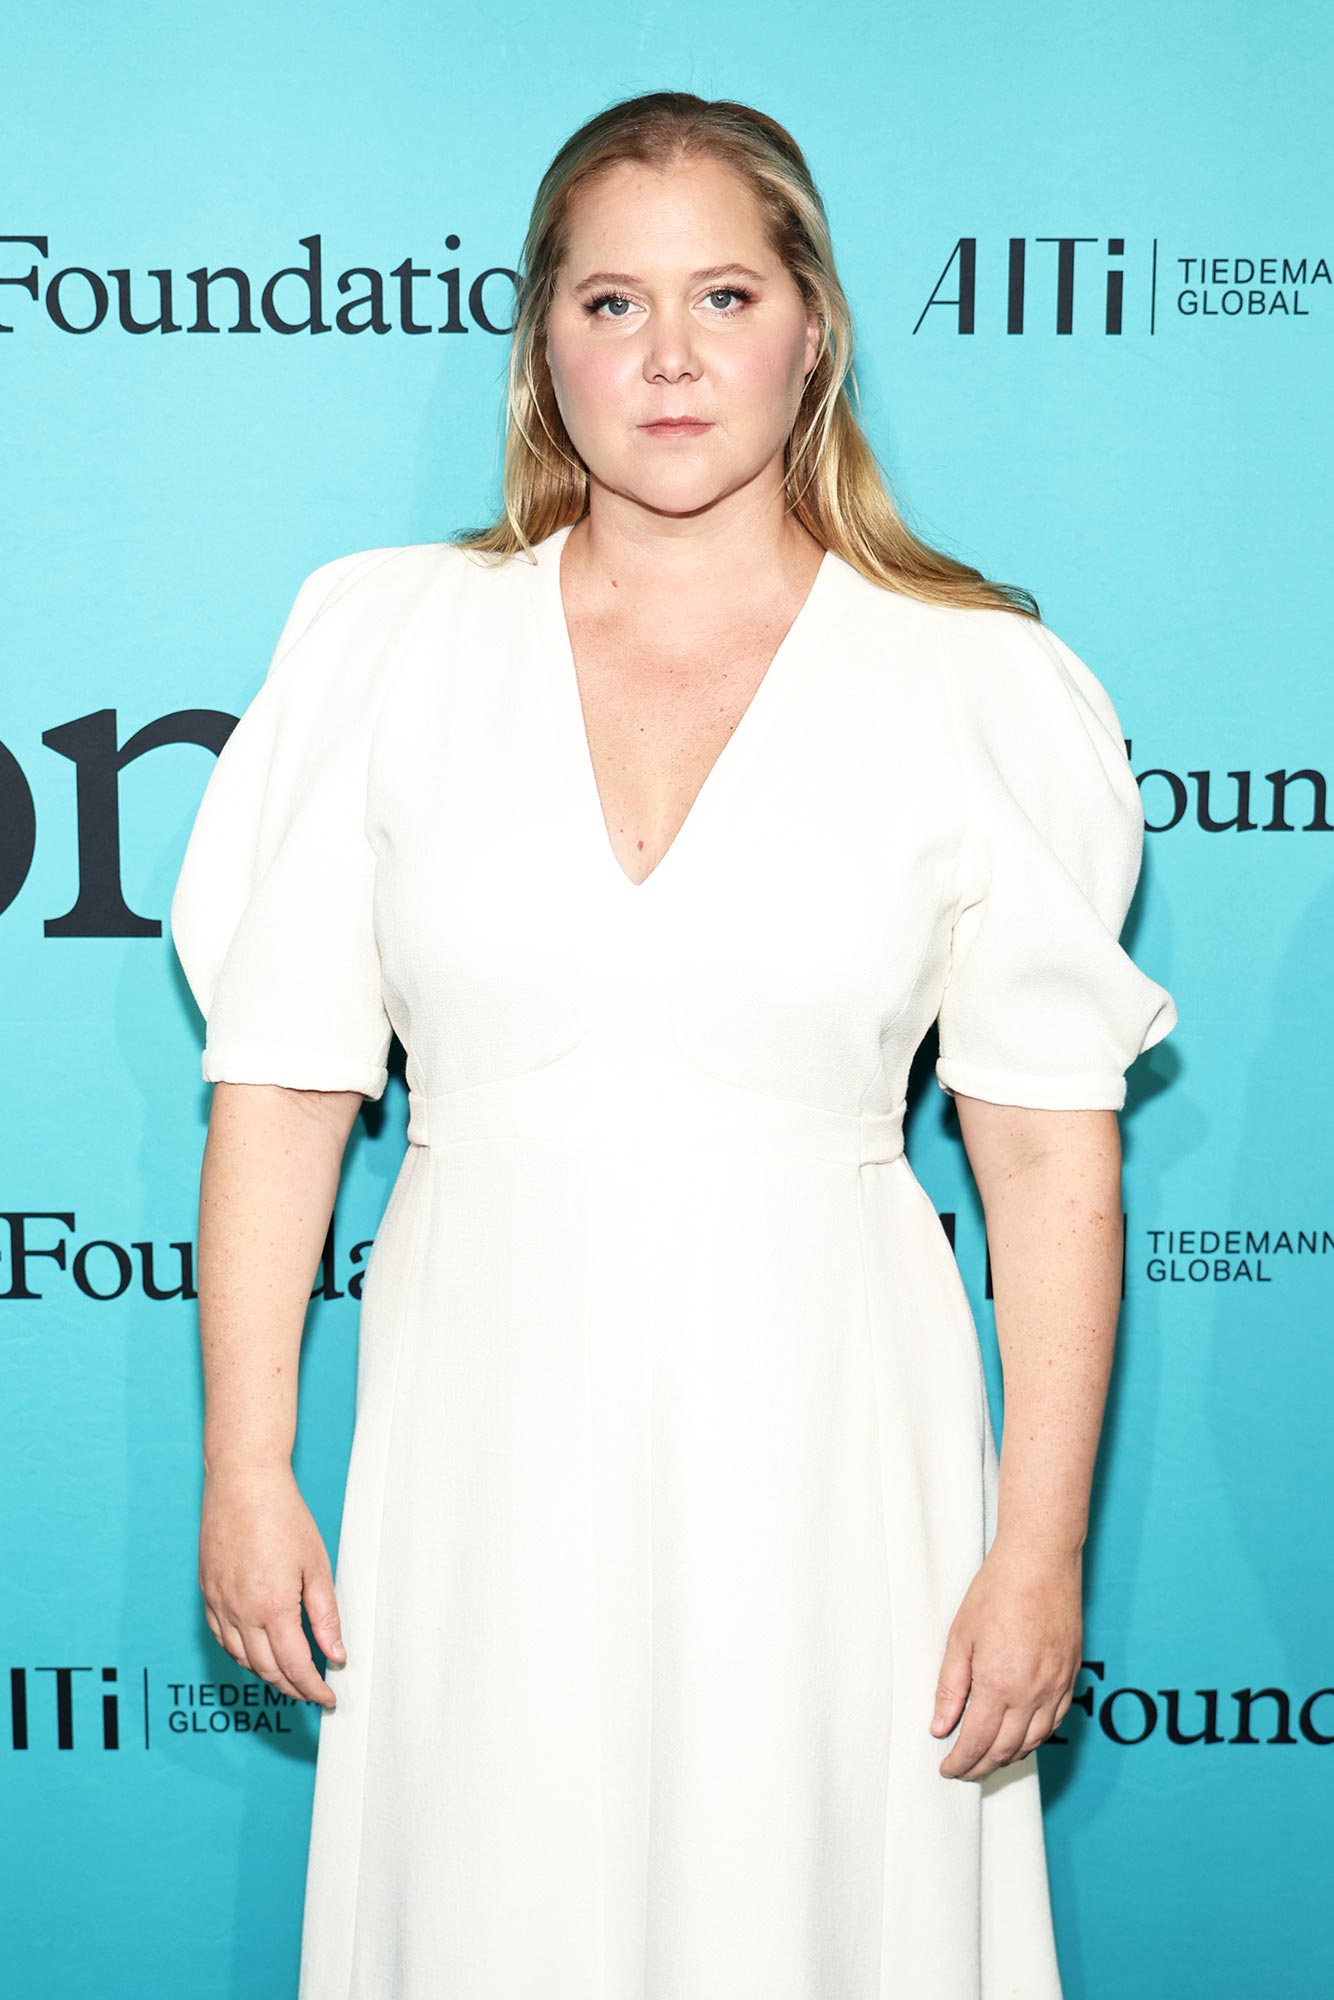 Amy Schumer Says Puffy Face Comments Led to Cushing Syndrome Diagnosis